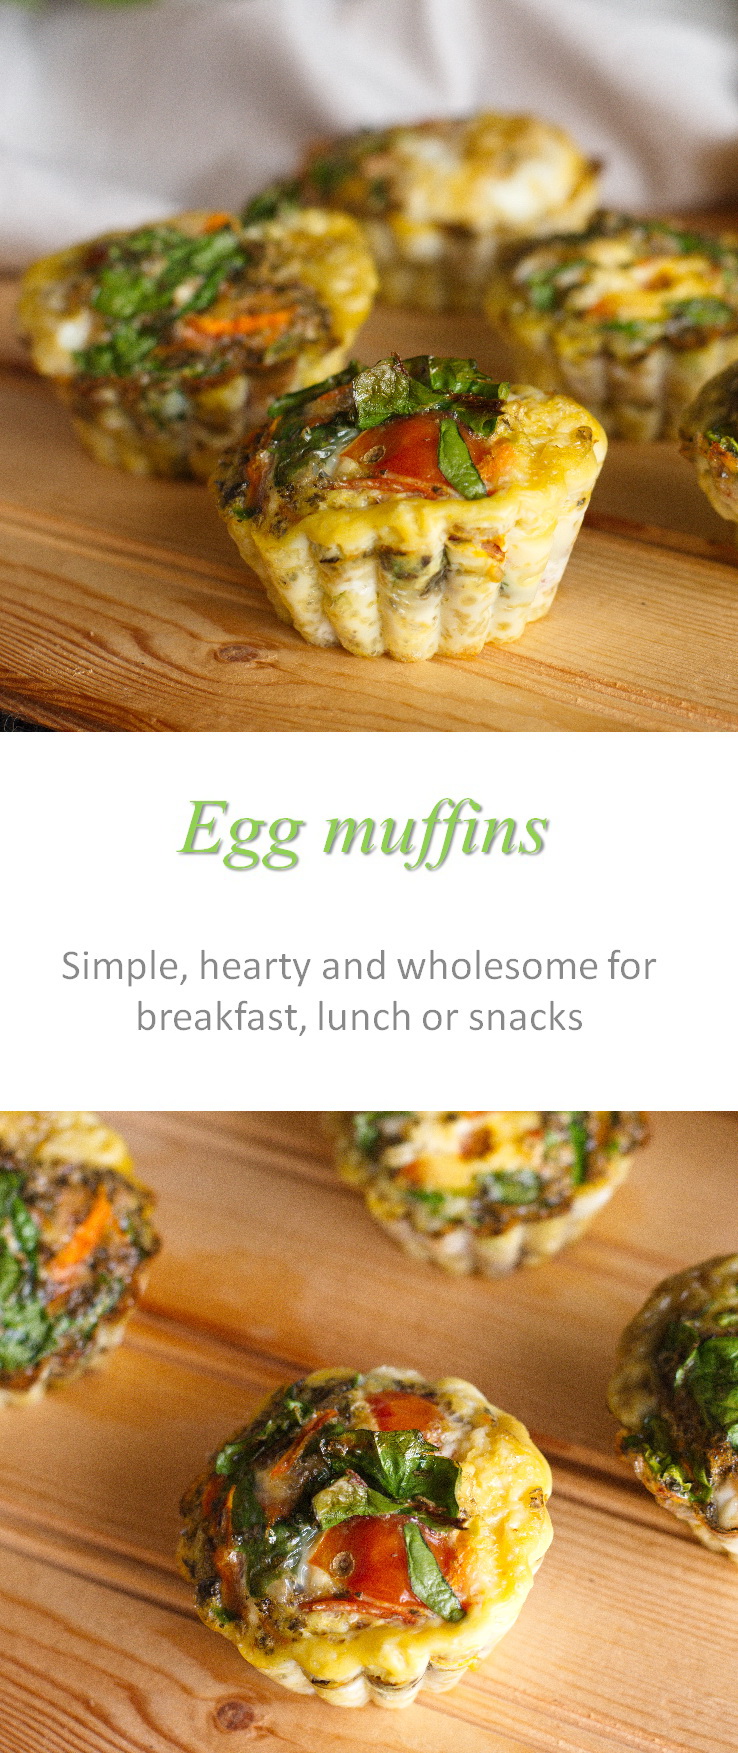 These egg muffins are really easy to make and can use whatever vegetables or other ingredients you have on hand. #eggmuffins